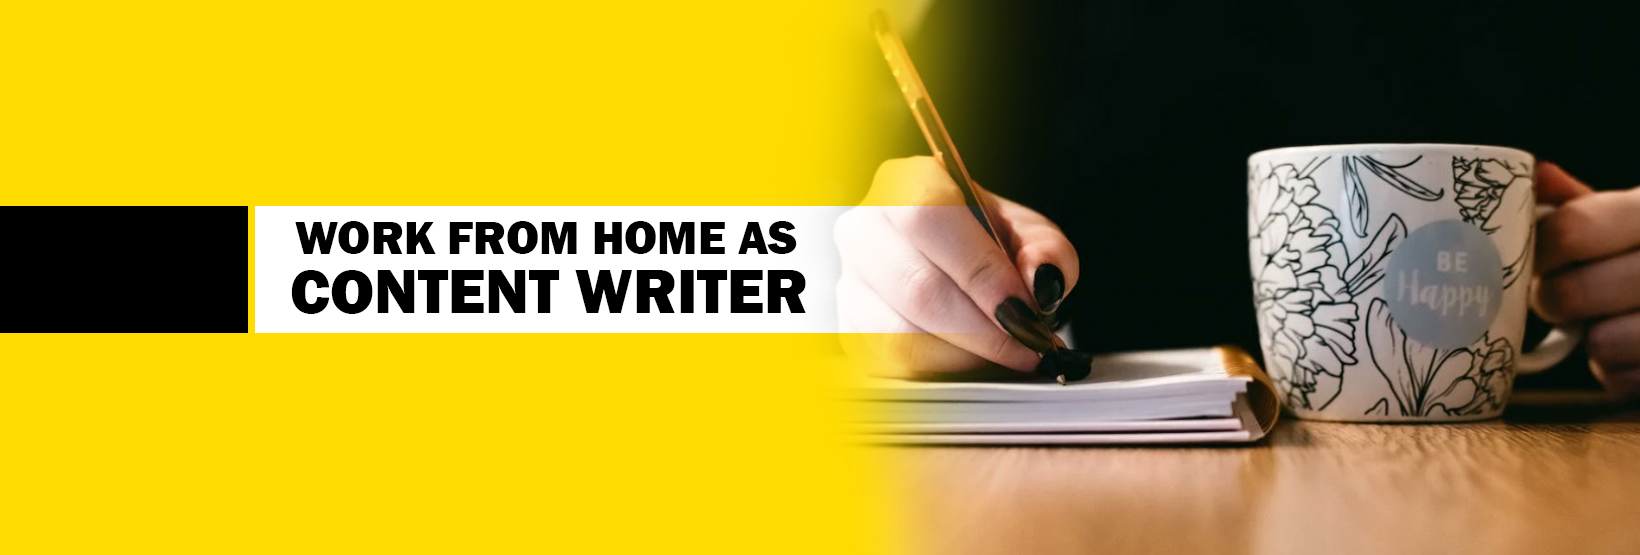 Work From Home As Content Writer